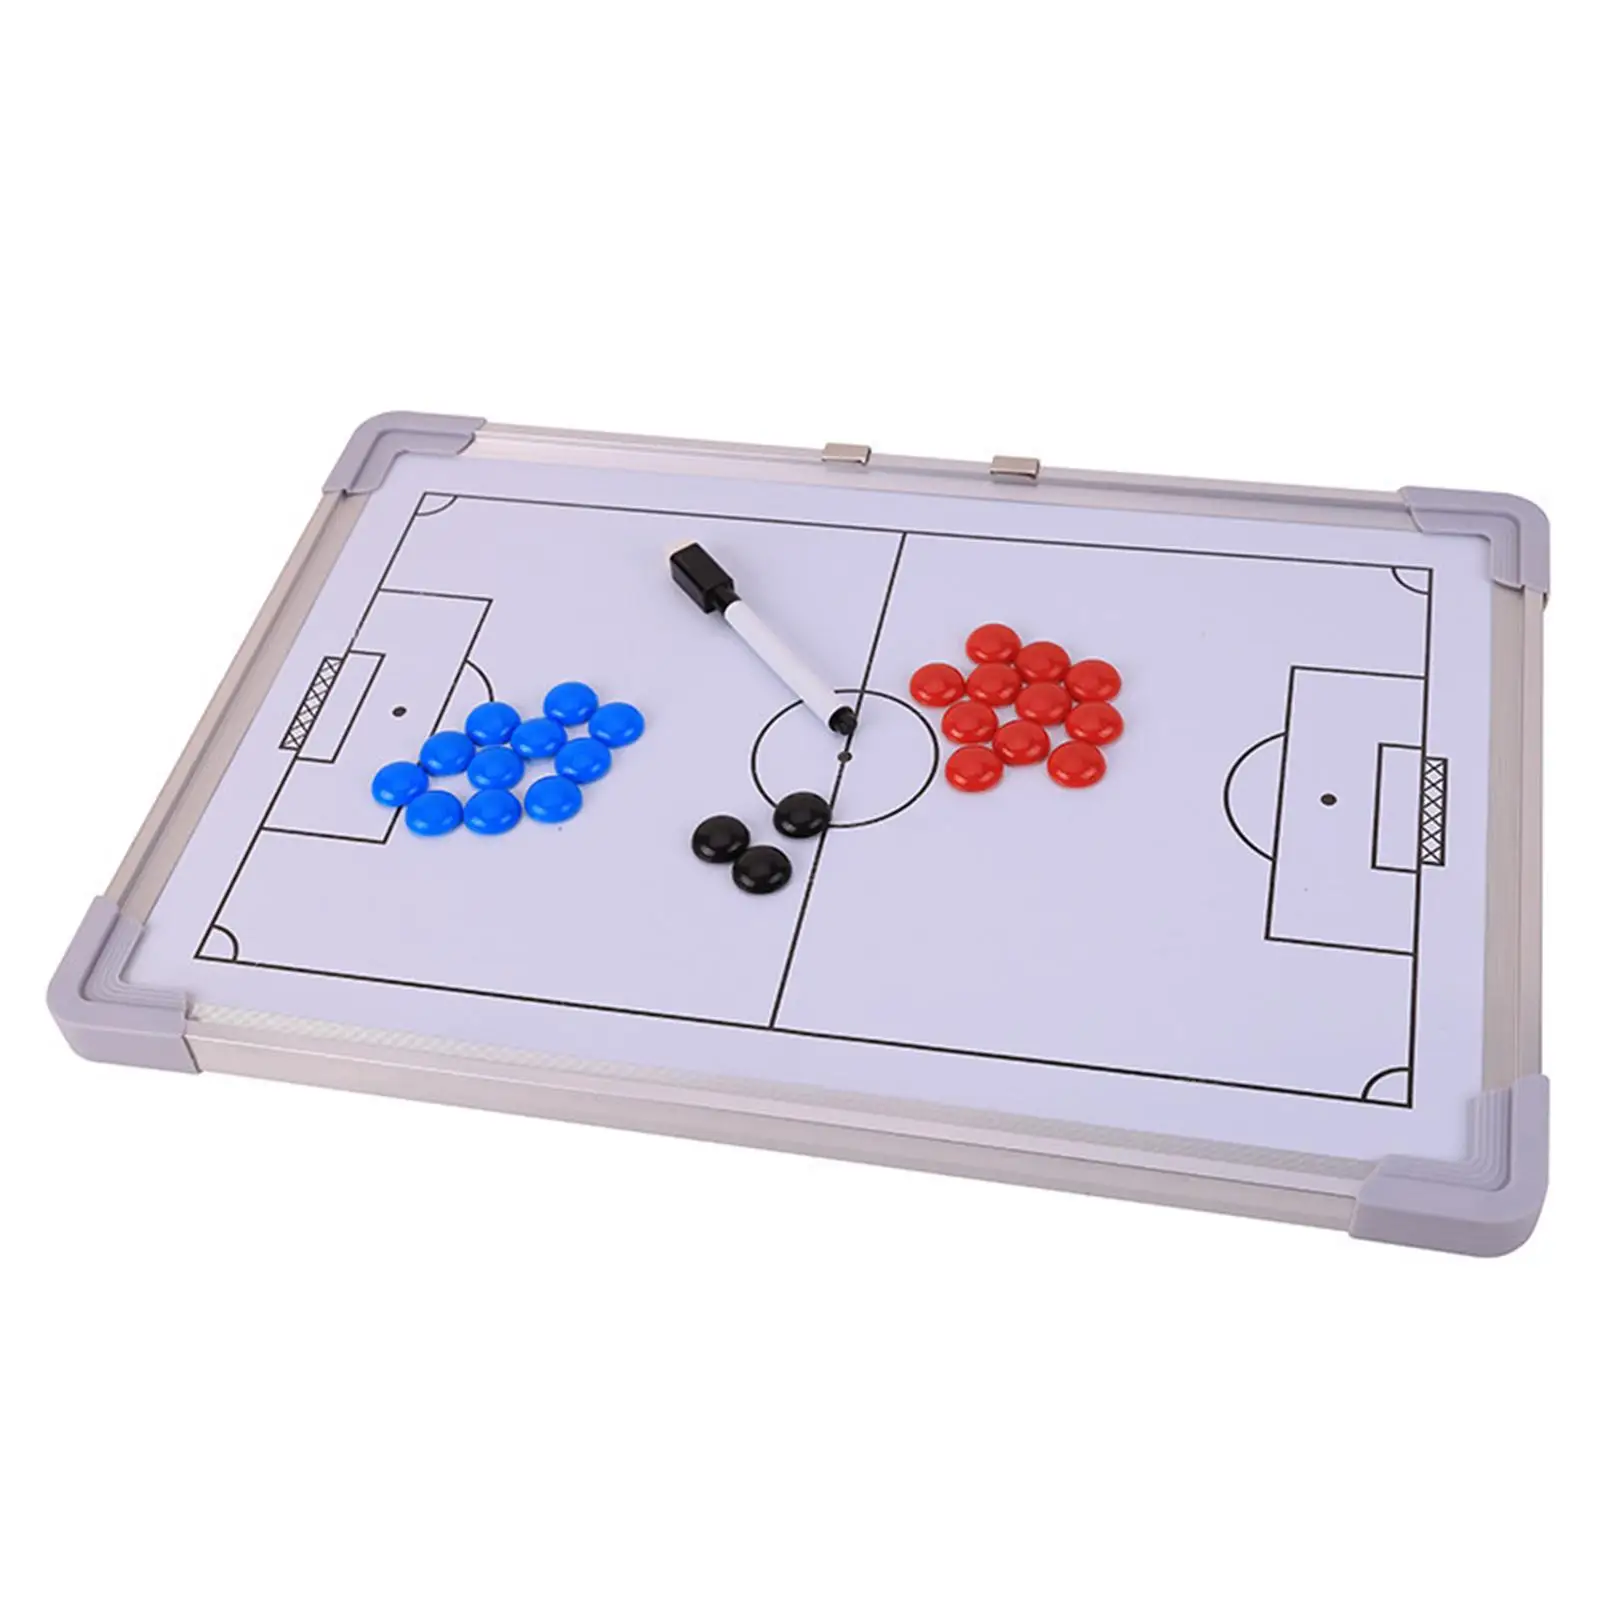 Football Soccer with 27 Buttons Strategy Board